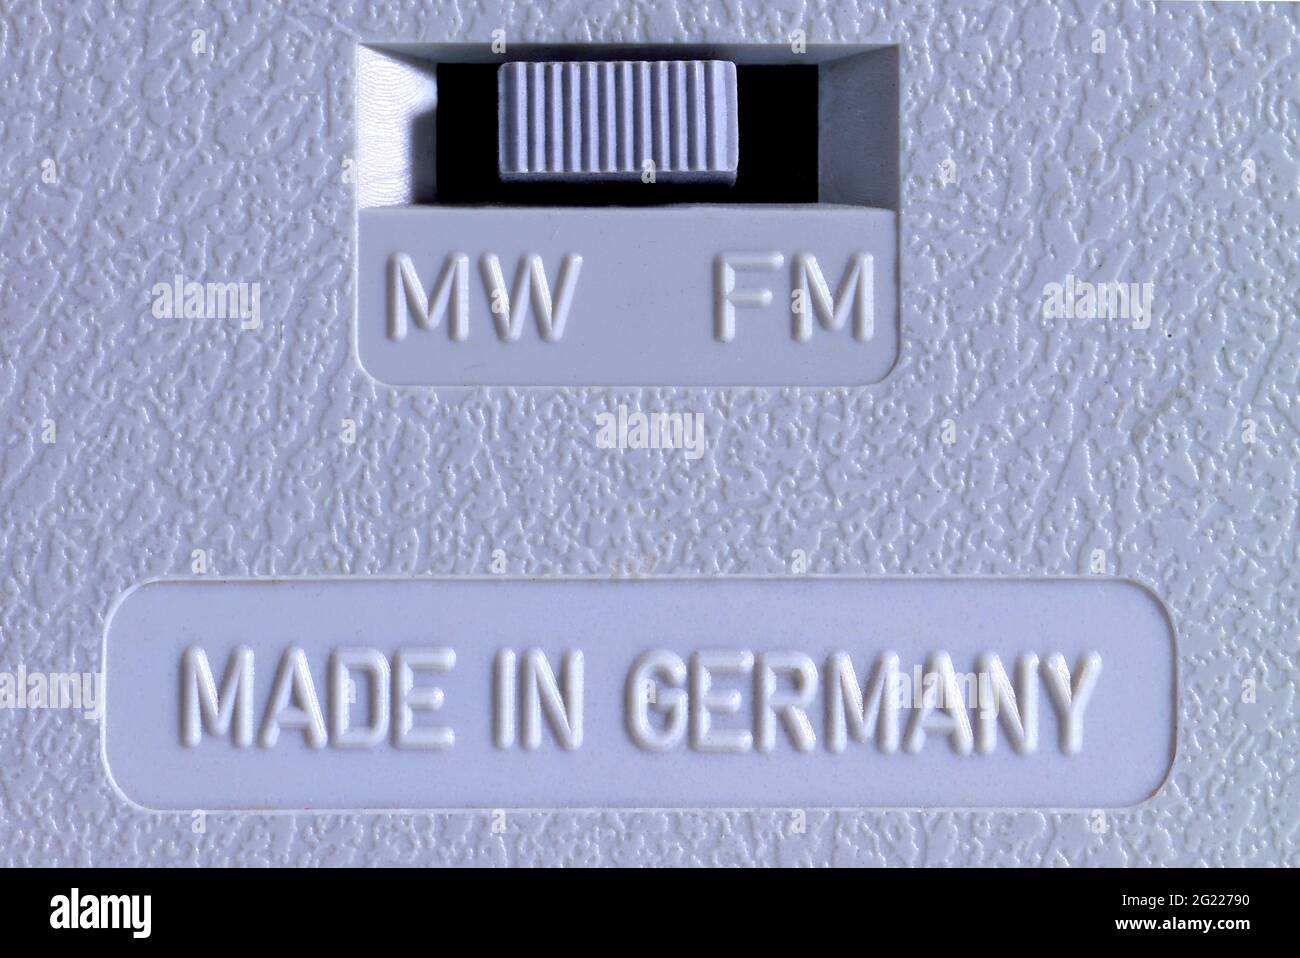 broadcast, radio, technique, symbol image, Made in Germany, reverse side of an old Siemens radio, ADDITIONAL-RIGHTS-CLEARANCE-INFO-NOT-AVAILABLE Stock Photo